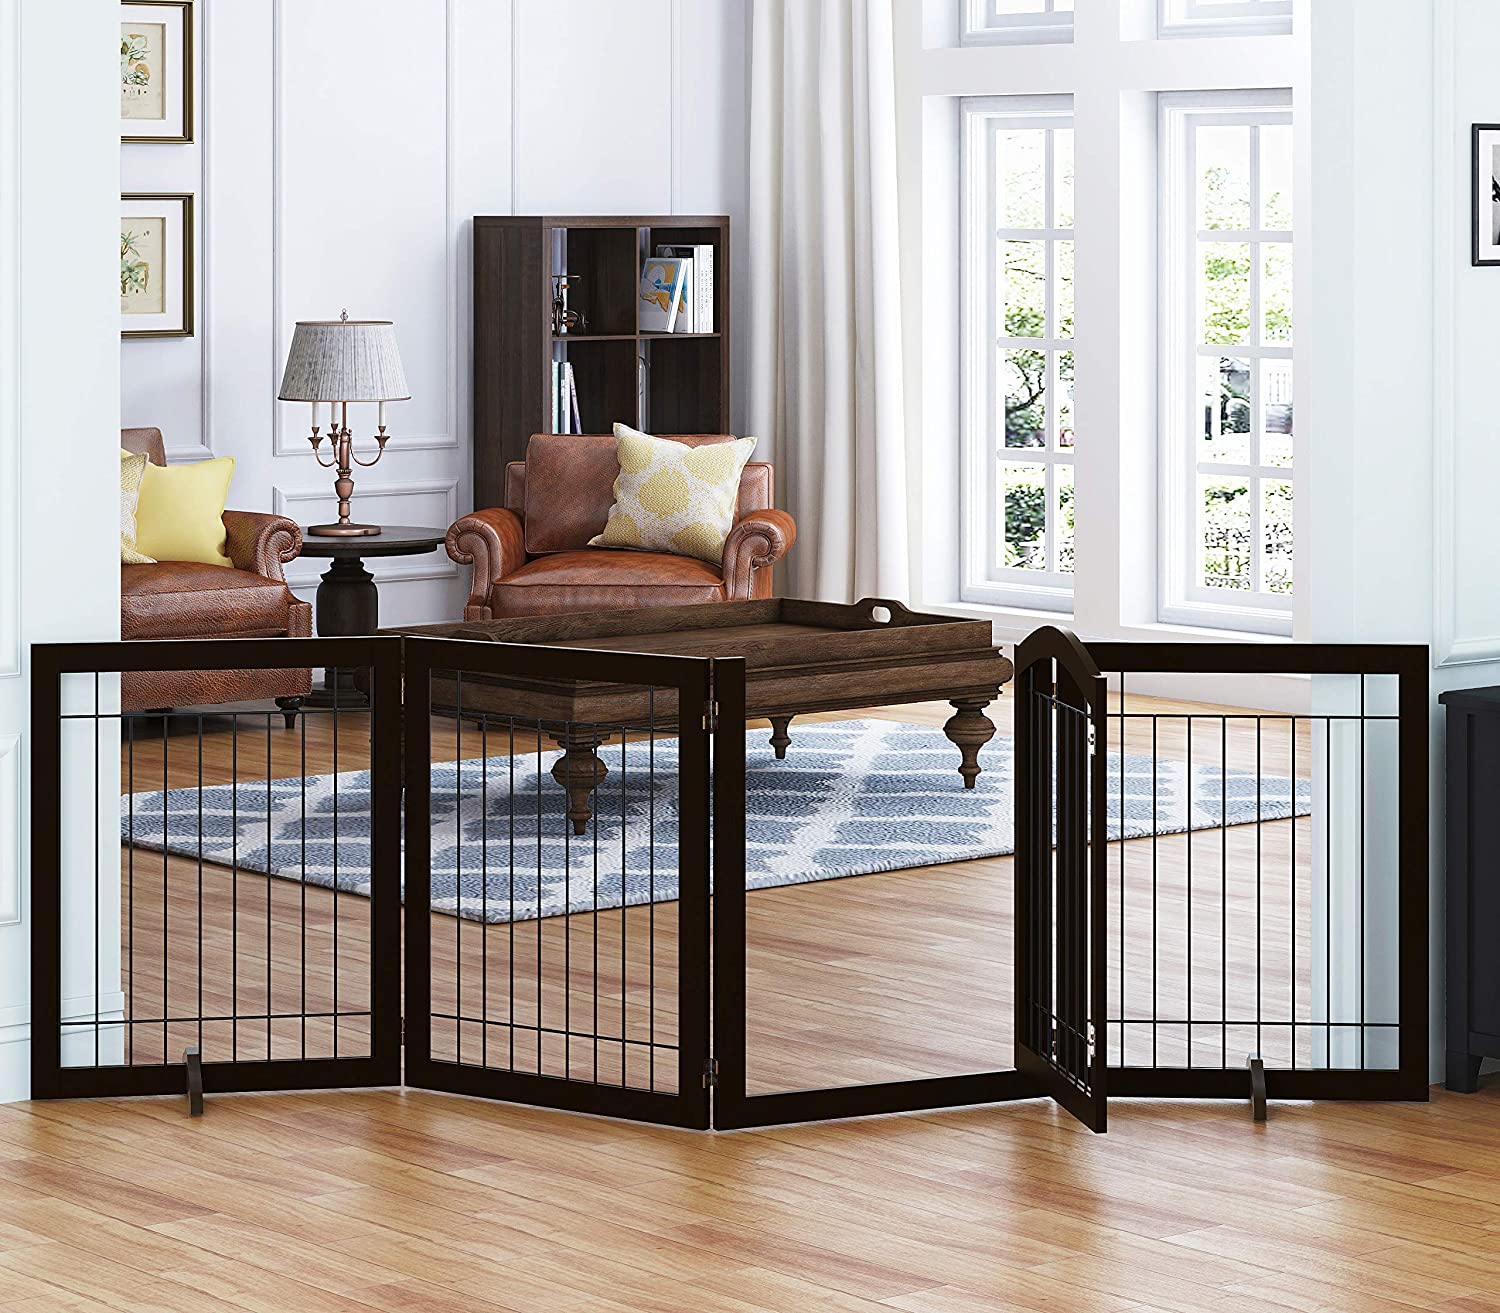 PAWLAND 96-inch Extra Wide 30-inches Tall Dog gate with Door Walk Through, Freestanding Wire Pet Gate for The House, Doorway, Stairs, Pet Puppy Safety Fence, Support Feet Included(Espresso) - image 1 of 6